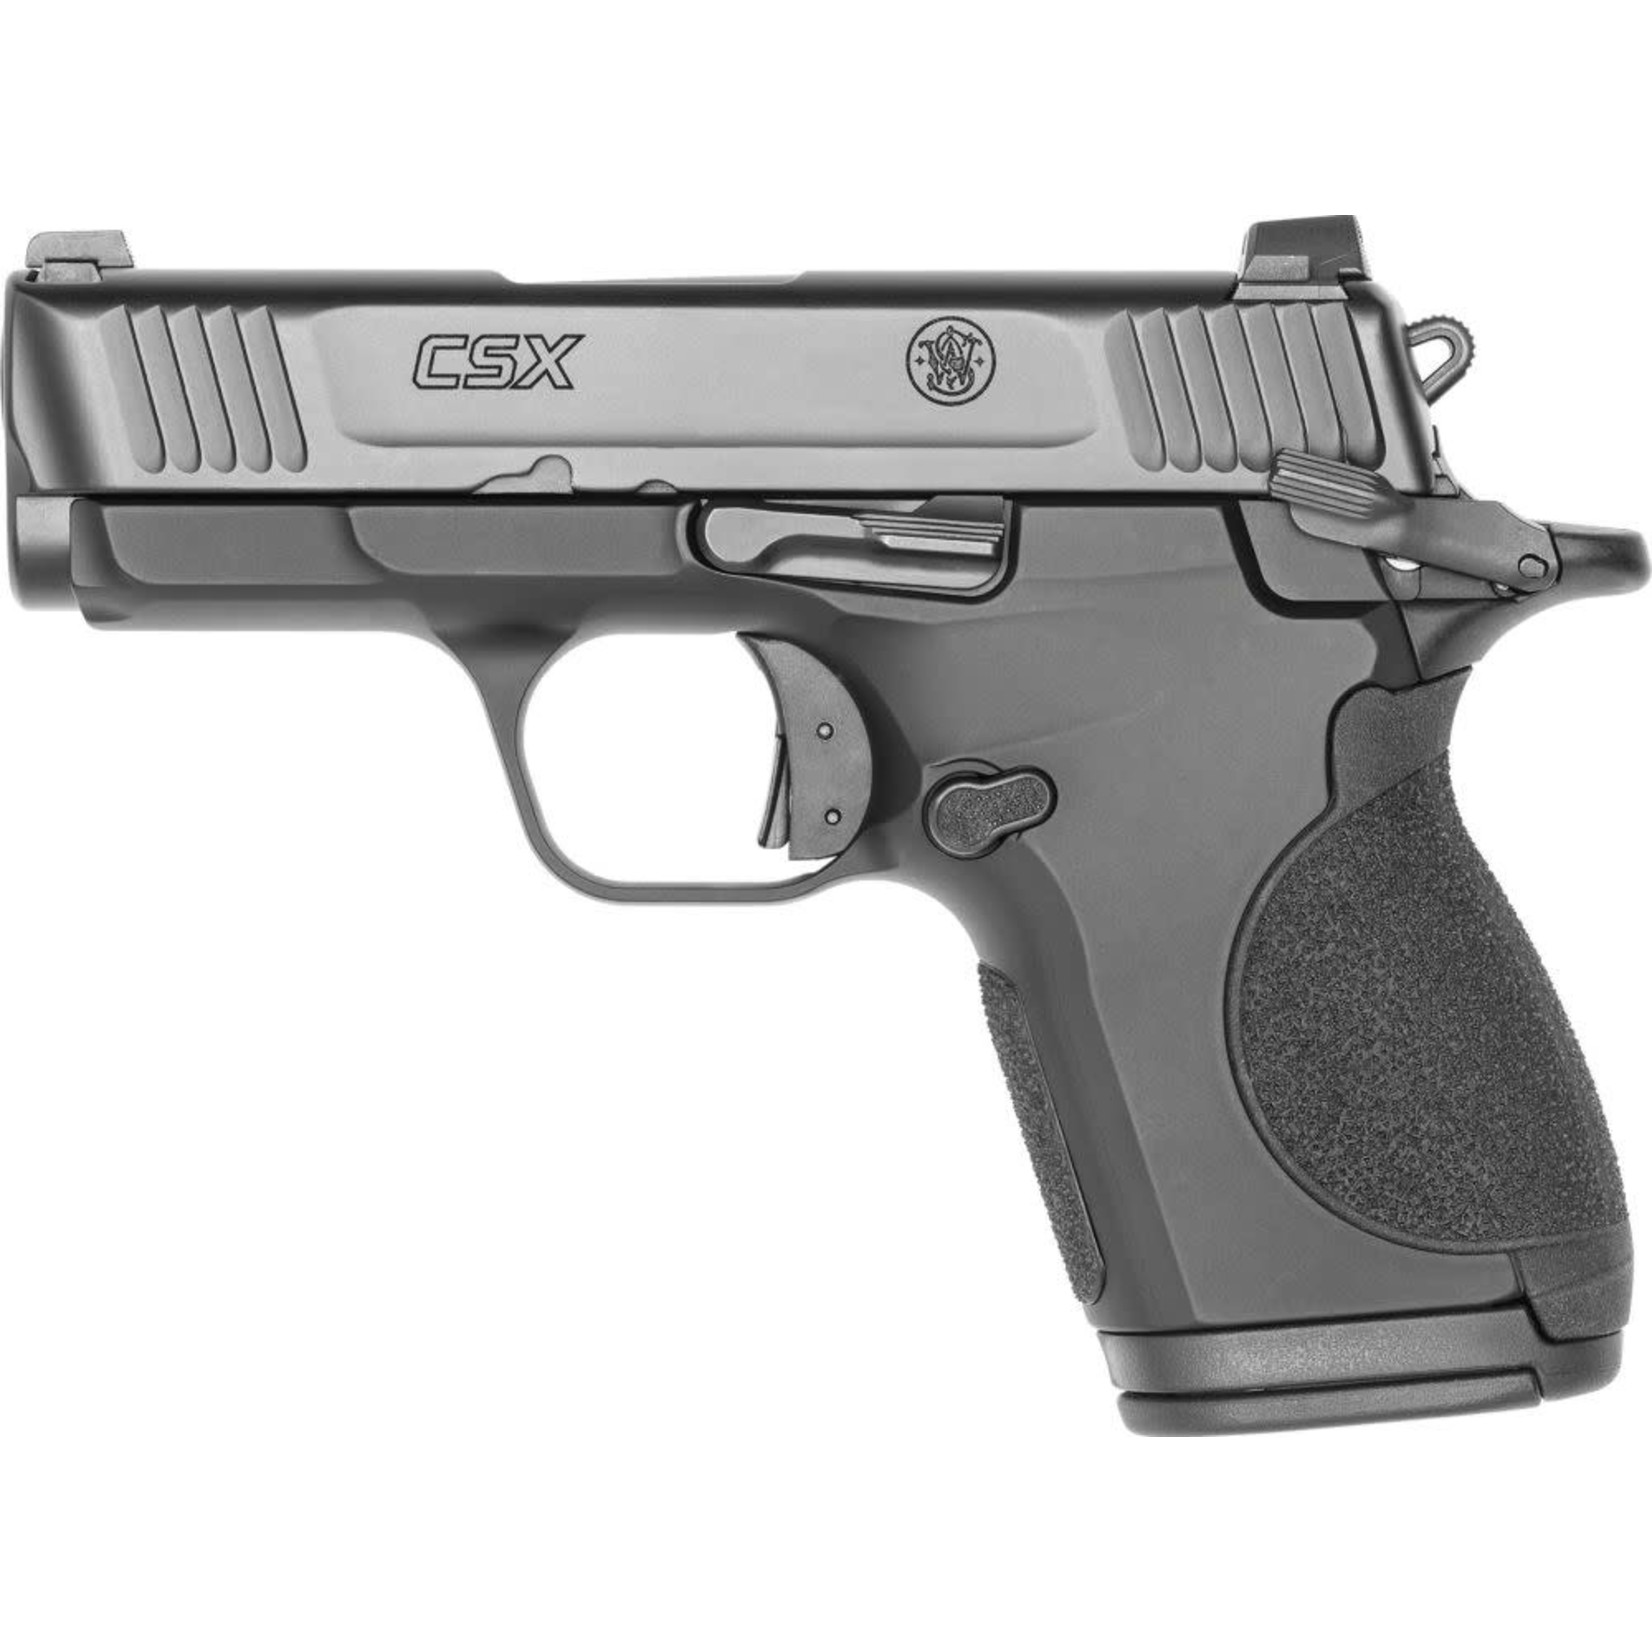 Smith & Wesson Smith & Wesson CSX 9mm